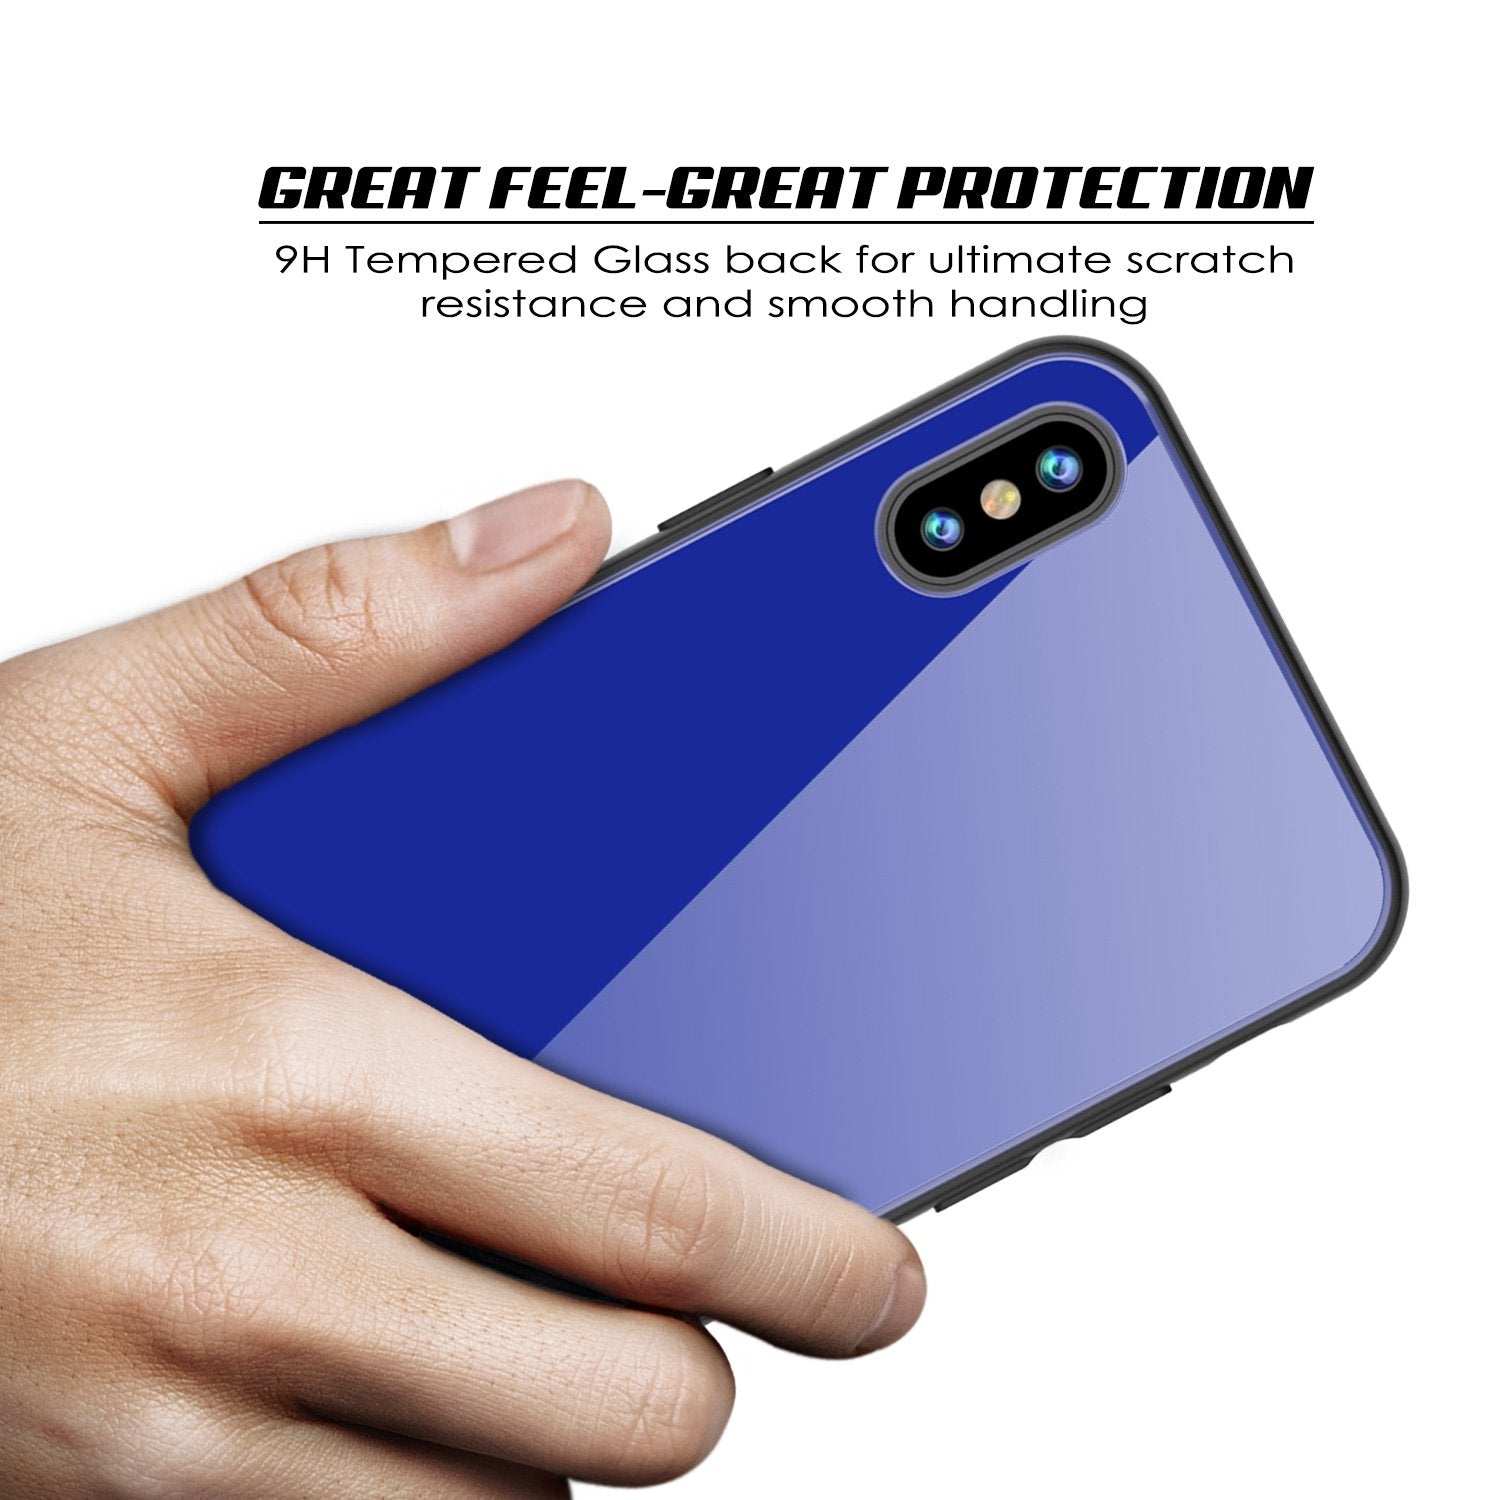 iPhone X Case, Punkcase GlassShield Ultra Thin Protective 9H Full Body Tempered Glass Cover W/ Drop Protection & Non Slip Grip for Apple iPhone 10 [Blue]